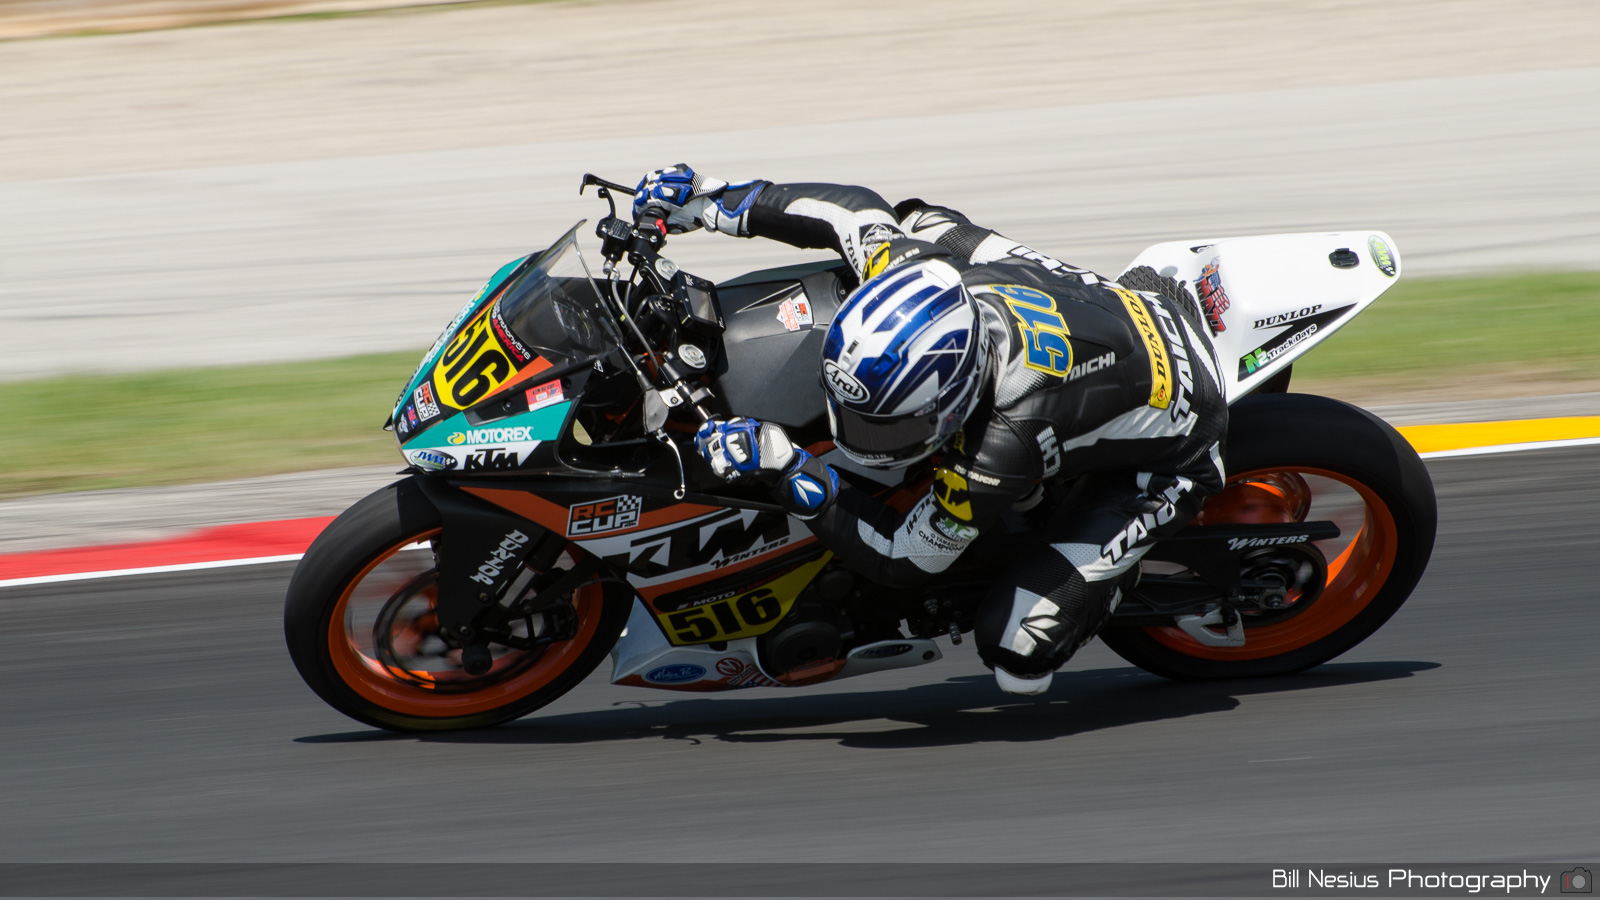 Anthony Mazziotto III on the No.516 KTM RC Cup in thurn 6 / DSC_4440 / 4